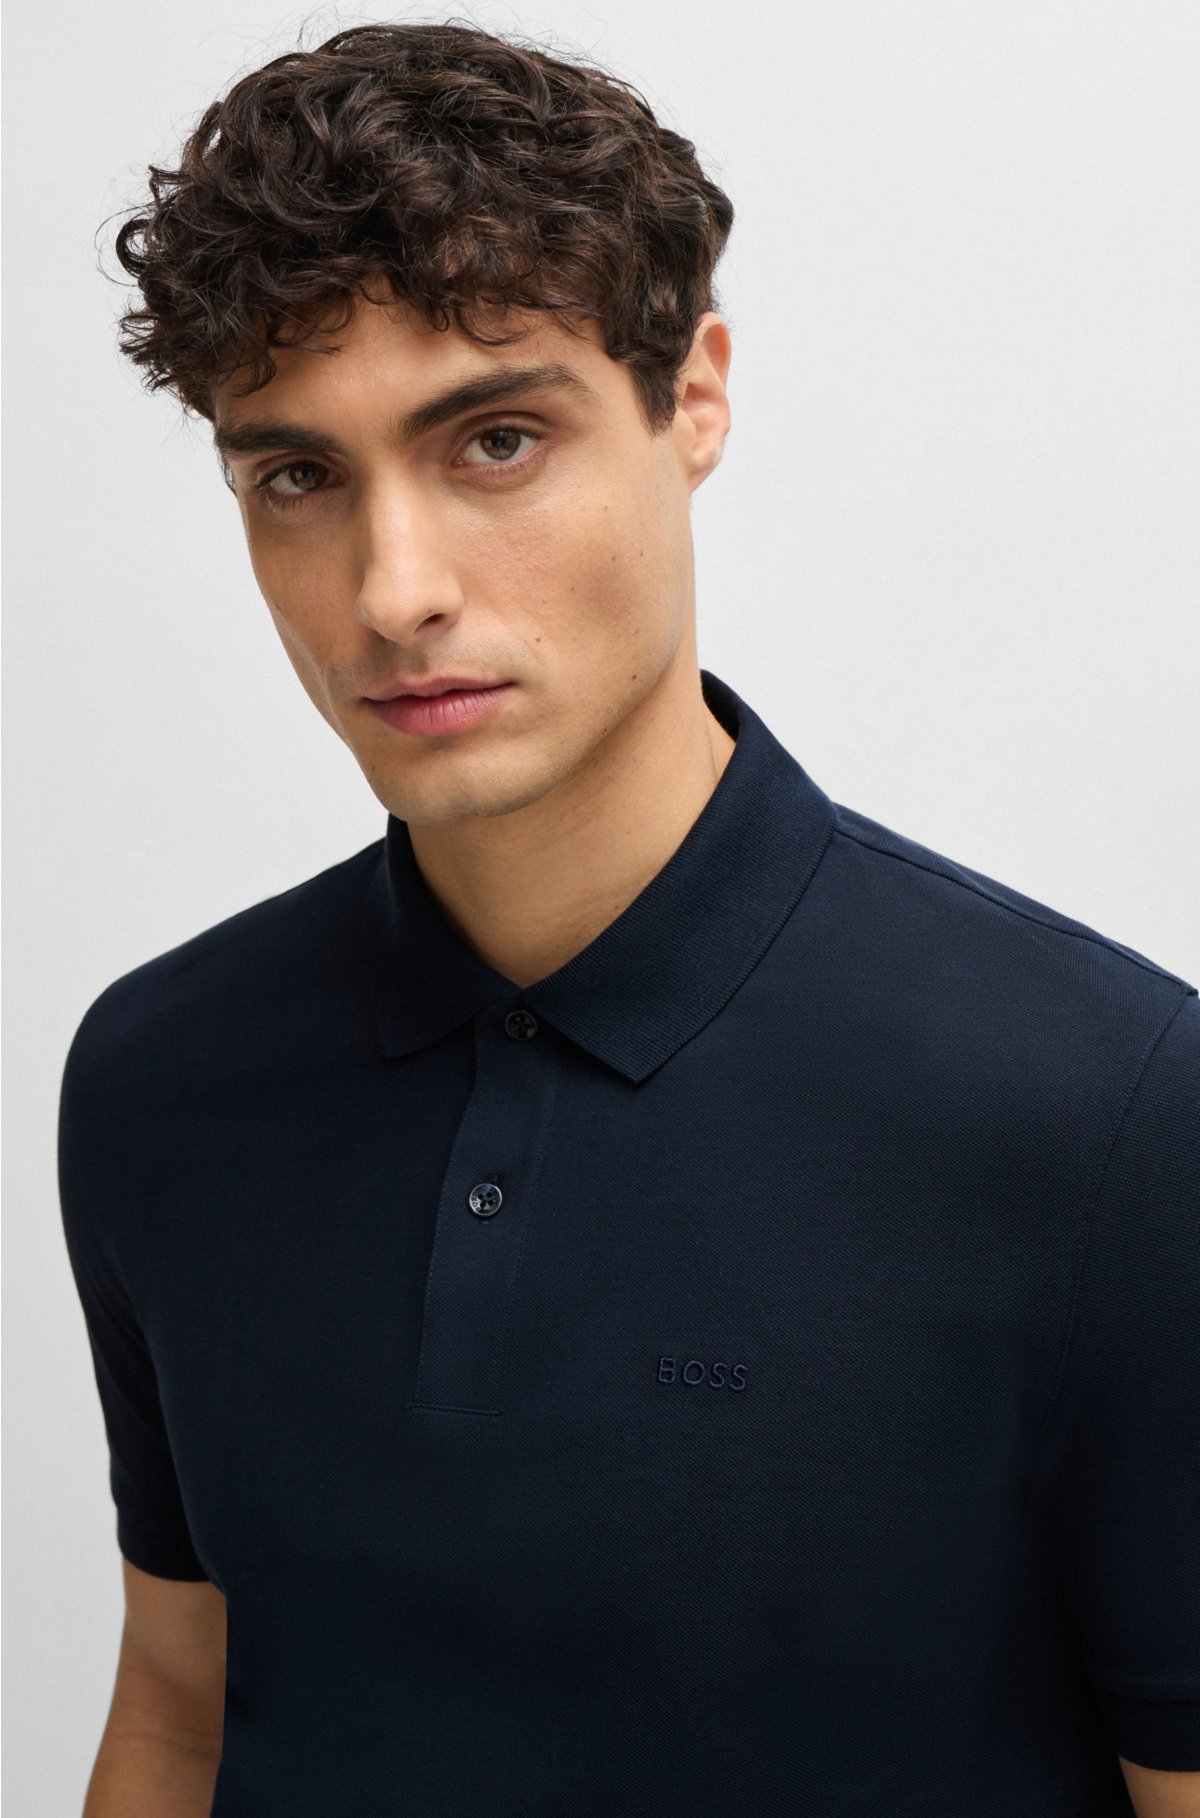 BOSS - Polo embroidered with logo shirt